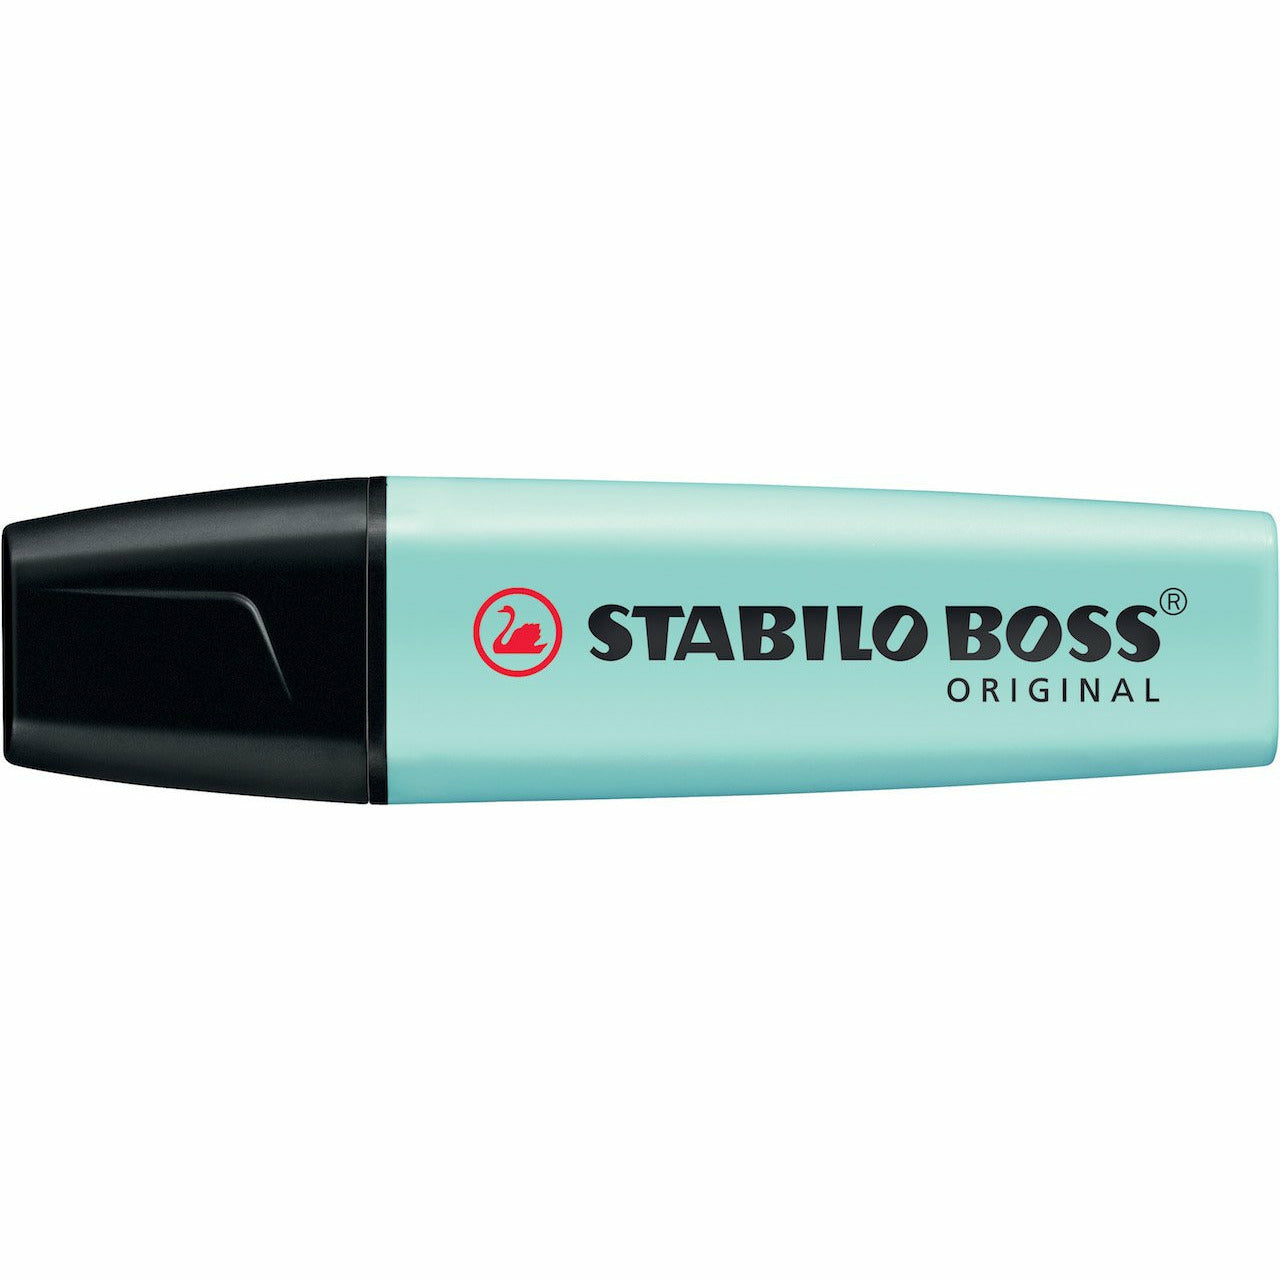 STABILO BOSS Original pastel touch of turquoise